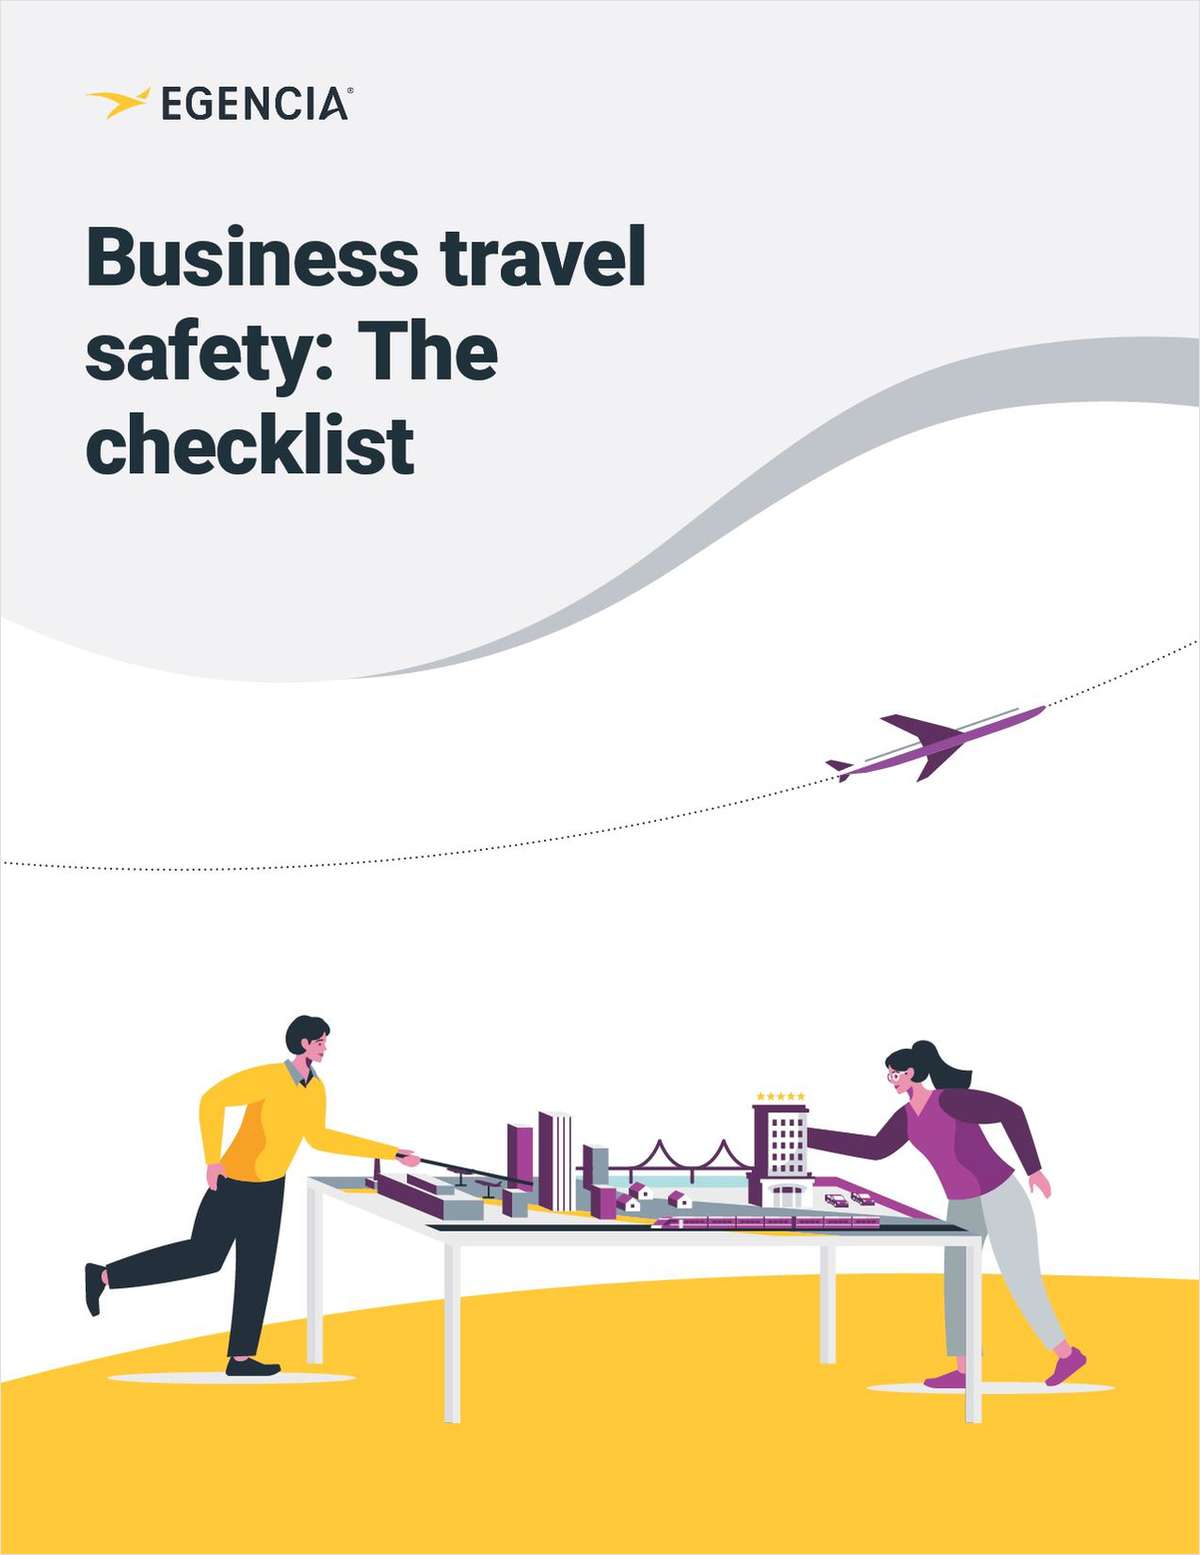 The Checklist for Business Travel Safety